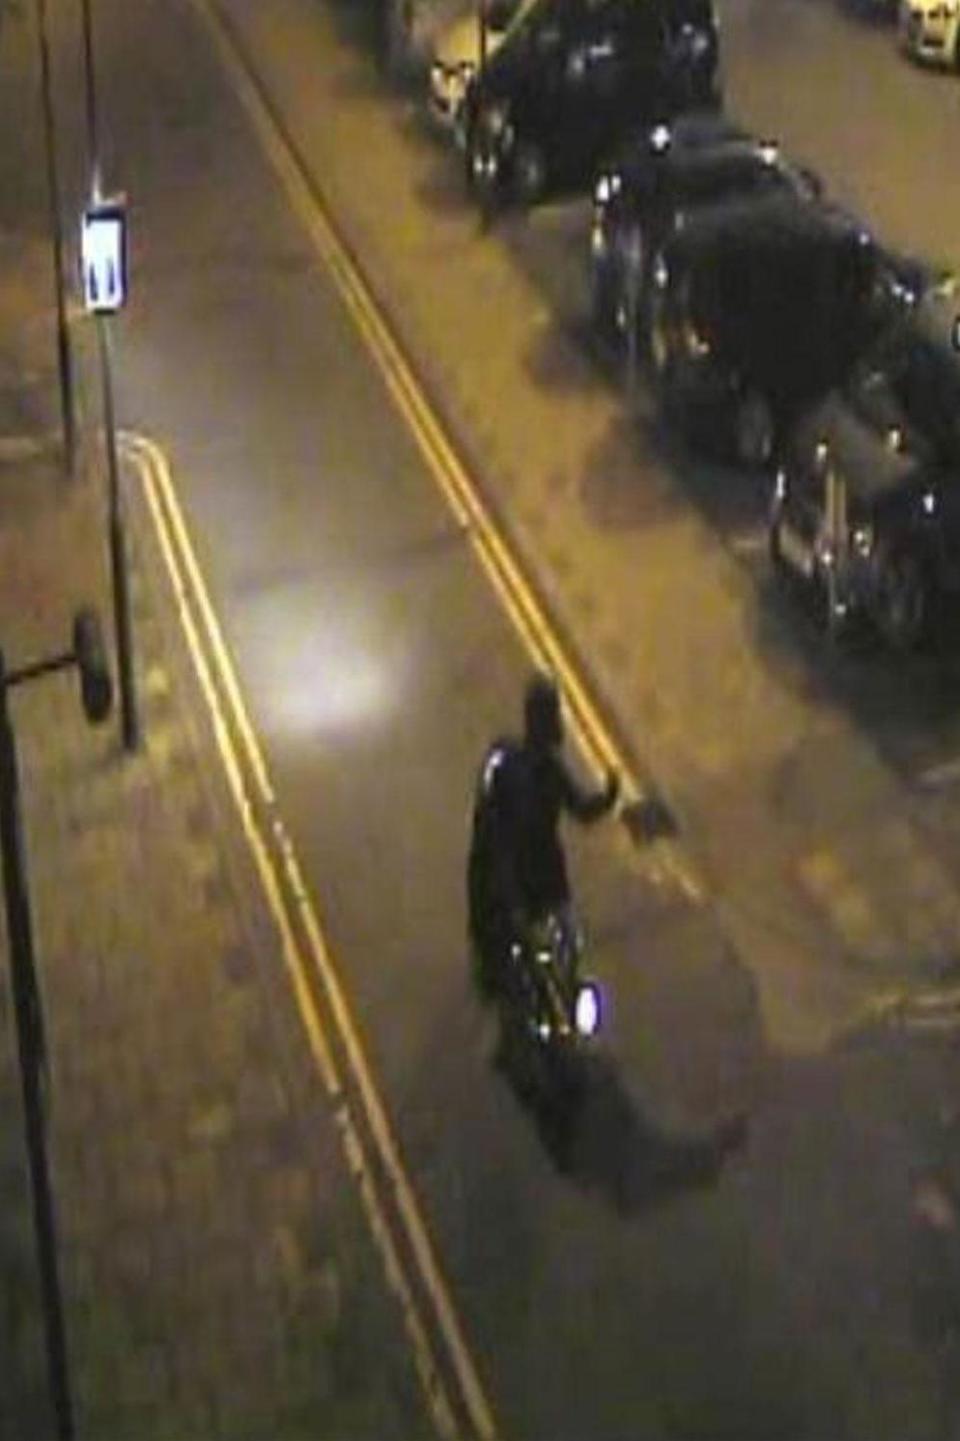 A CCTV still showing the moped riding away. (Met Police)